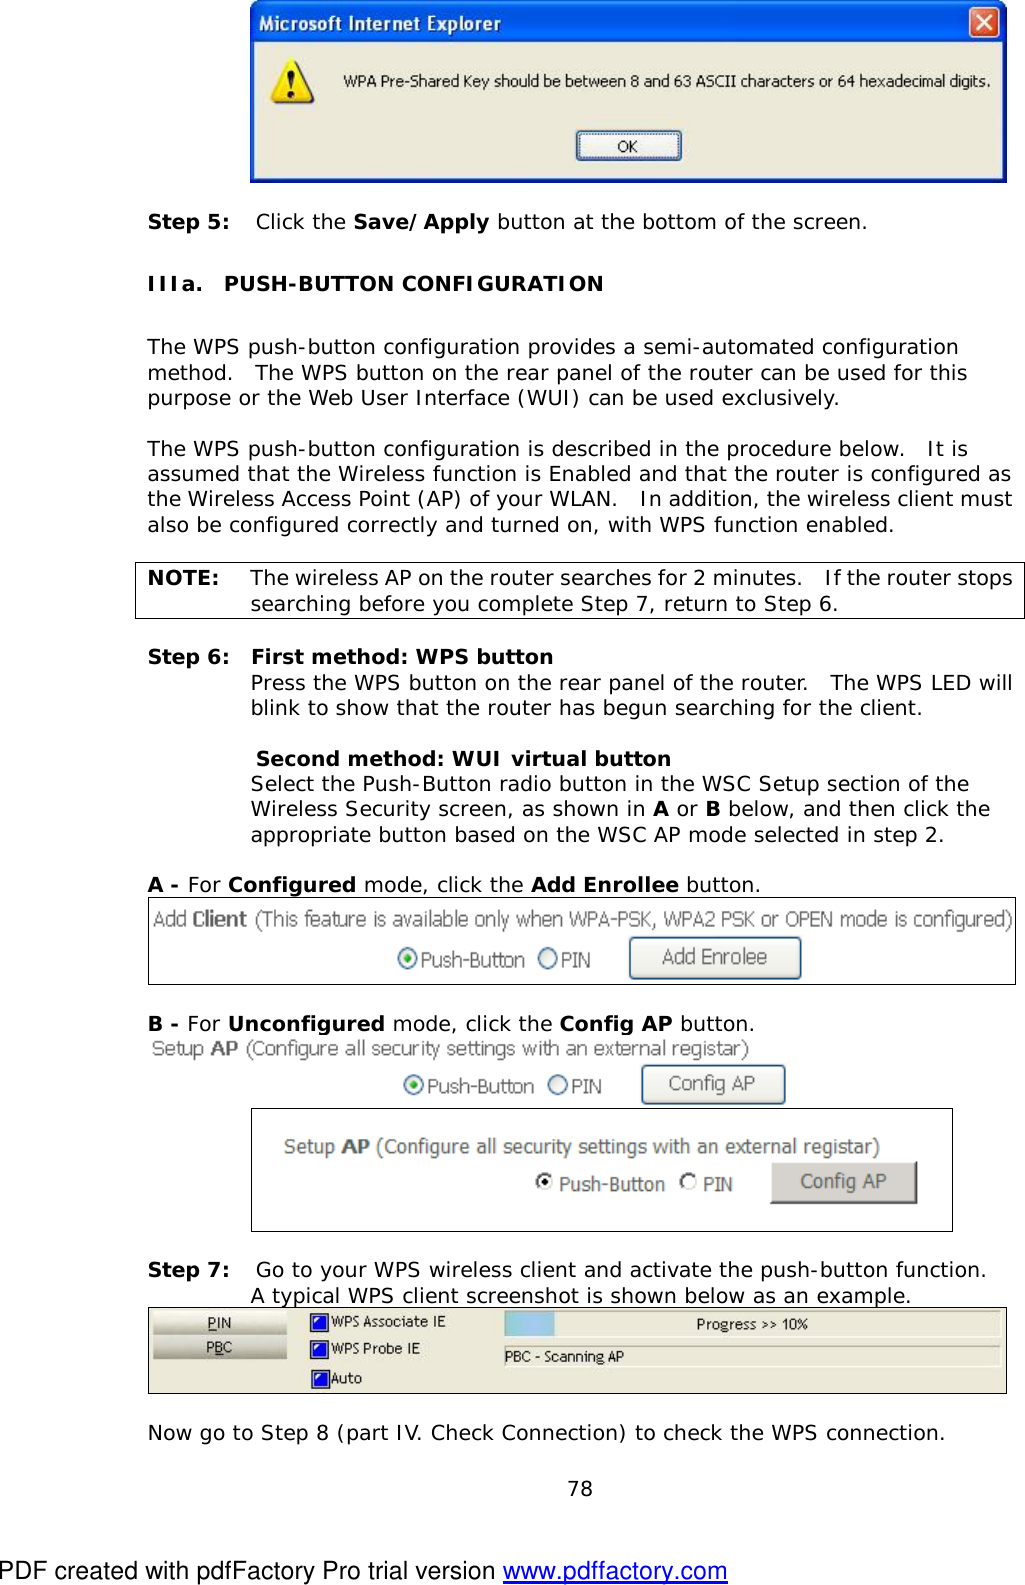  78     Step 5:  Click the Save/Apply button at the bottom of the screen. IIIa.  PUSH-BUTTON CONFIGURATION The WPS push-button configuration provides a semi-automated configuration method.  The WPS button on the rear panel of the router can be used for this purpose or the Web User Interface (WUI) can be used exclusively.    The WPS push-button configuration is described in the procedure below.  It is assumed that the Wireless function is Enabled and that the router is configured as the Wireless Access Point (AP) of your WLAN.  In addition, the wireless client must also be configured correctly and turned on, with WPS function enabled.  NOTE: The wireless AP on the router searches for 2 minutes.  If the router stops searching before you complete Step 7, return to Step 6.  Step 6:  First method: WPS button  Press the WPS button on the rear panel of the router.  The WPS LED will blink to show that the router has begun searching for the client.    Second method: WUI virtual button   Select the Push-Button radio button in the WSC Setup section of the Wireless Security screen, as shown in A or B below, and then click the appropriate button based on the WSC AP mode selected in step 2.  A - For Configured mode, click the Add Enrollee button.   B - For Unconfigured mode, click the Config AP button.   Step 7: Go to your WPS wireless client and activate the push-button function.    A typical WPS client screenshot is shown below as an example.   Now go to Step 8 (part IV. Check Connection) to check the WPS connection. PDF created with pdfFactory Pro trial version www.pdffactory.com